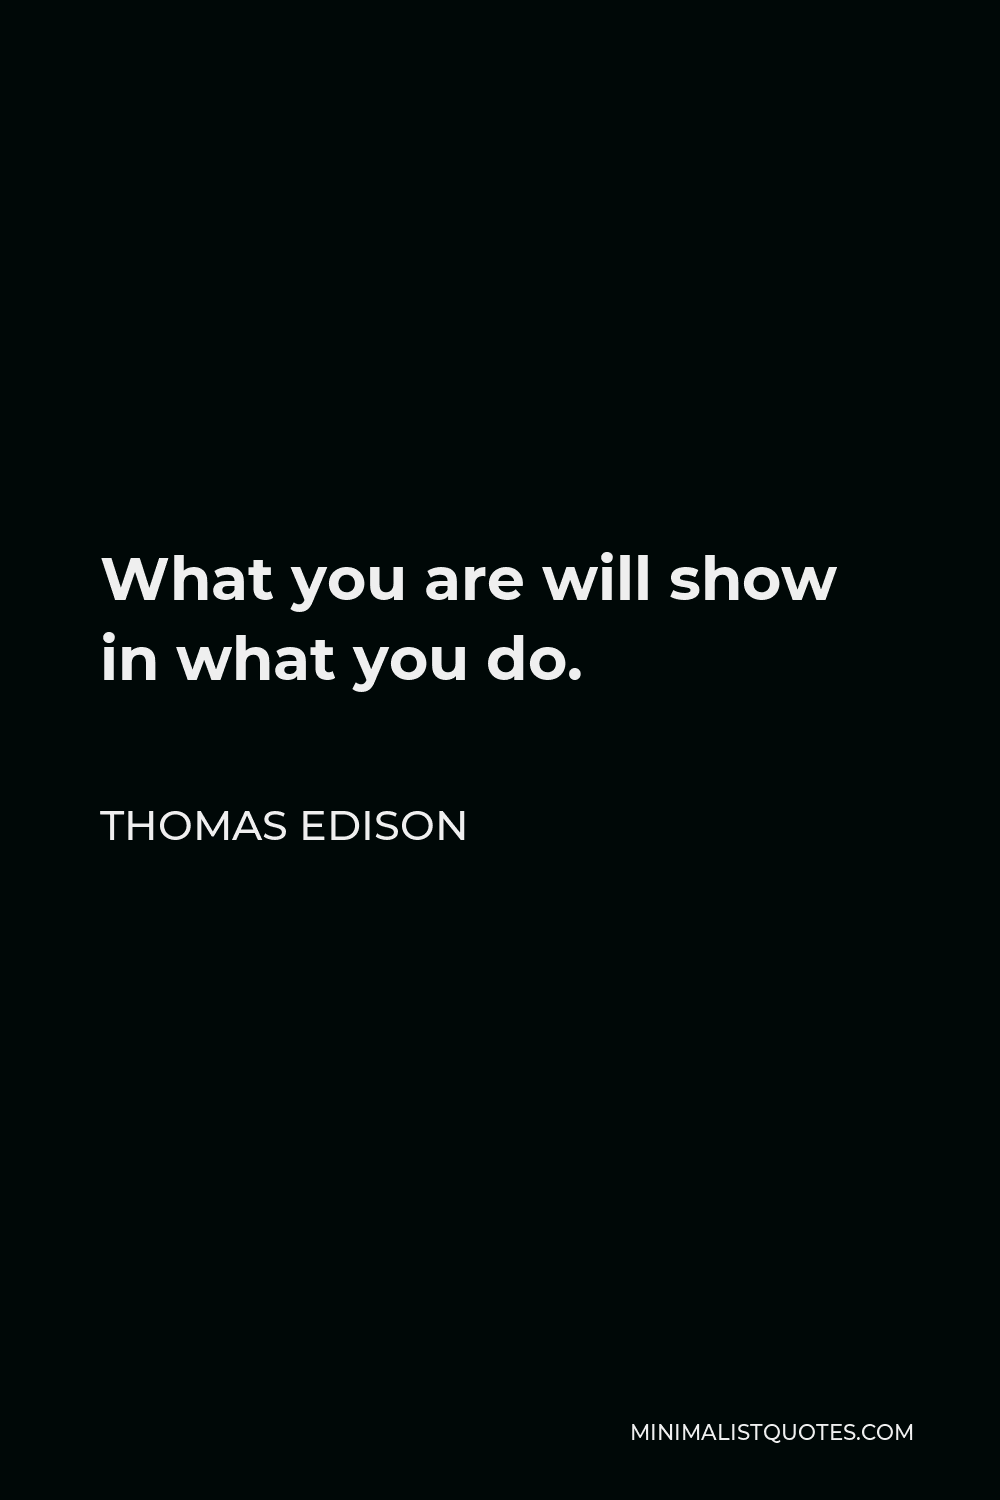 Thomas Edison Quote - What you are will show in what you do.